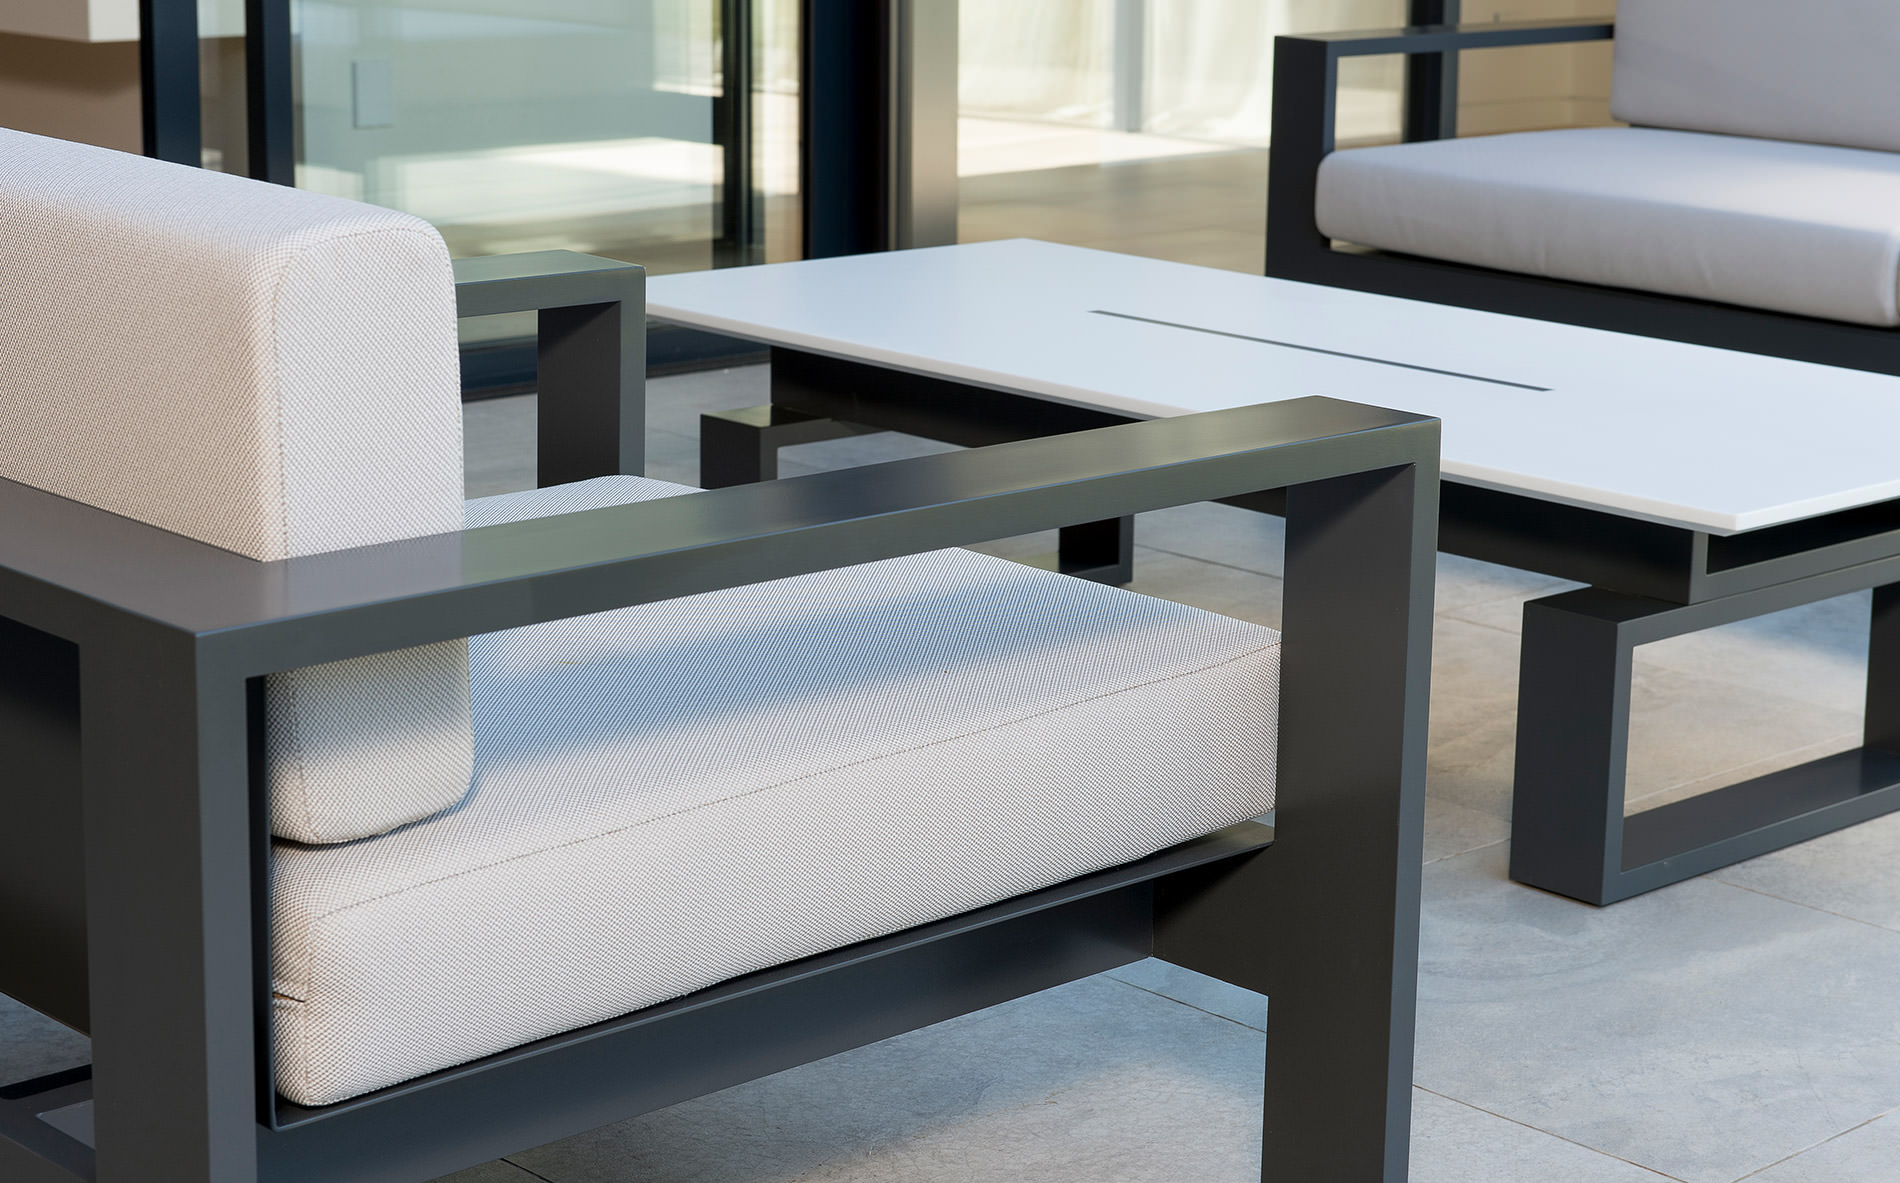 When your relaxing with friends and family in the backyard you want comfort to sit for long chats and Australian designer FrancoCrea's outdoor furniture harnesses innovative high performing materials to last decades.